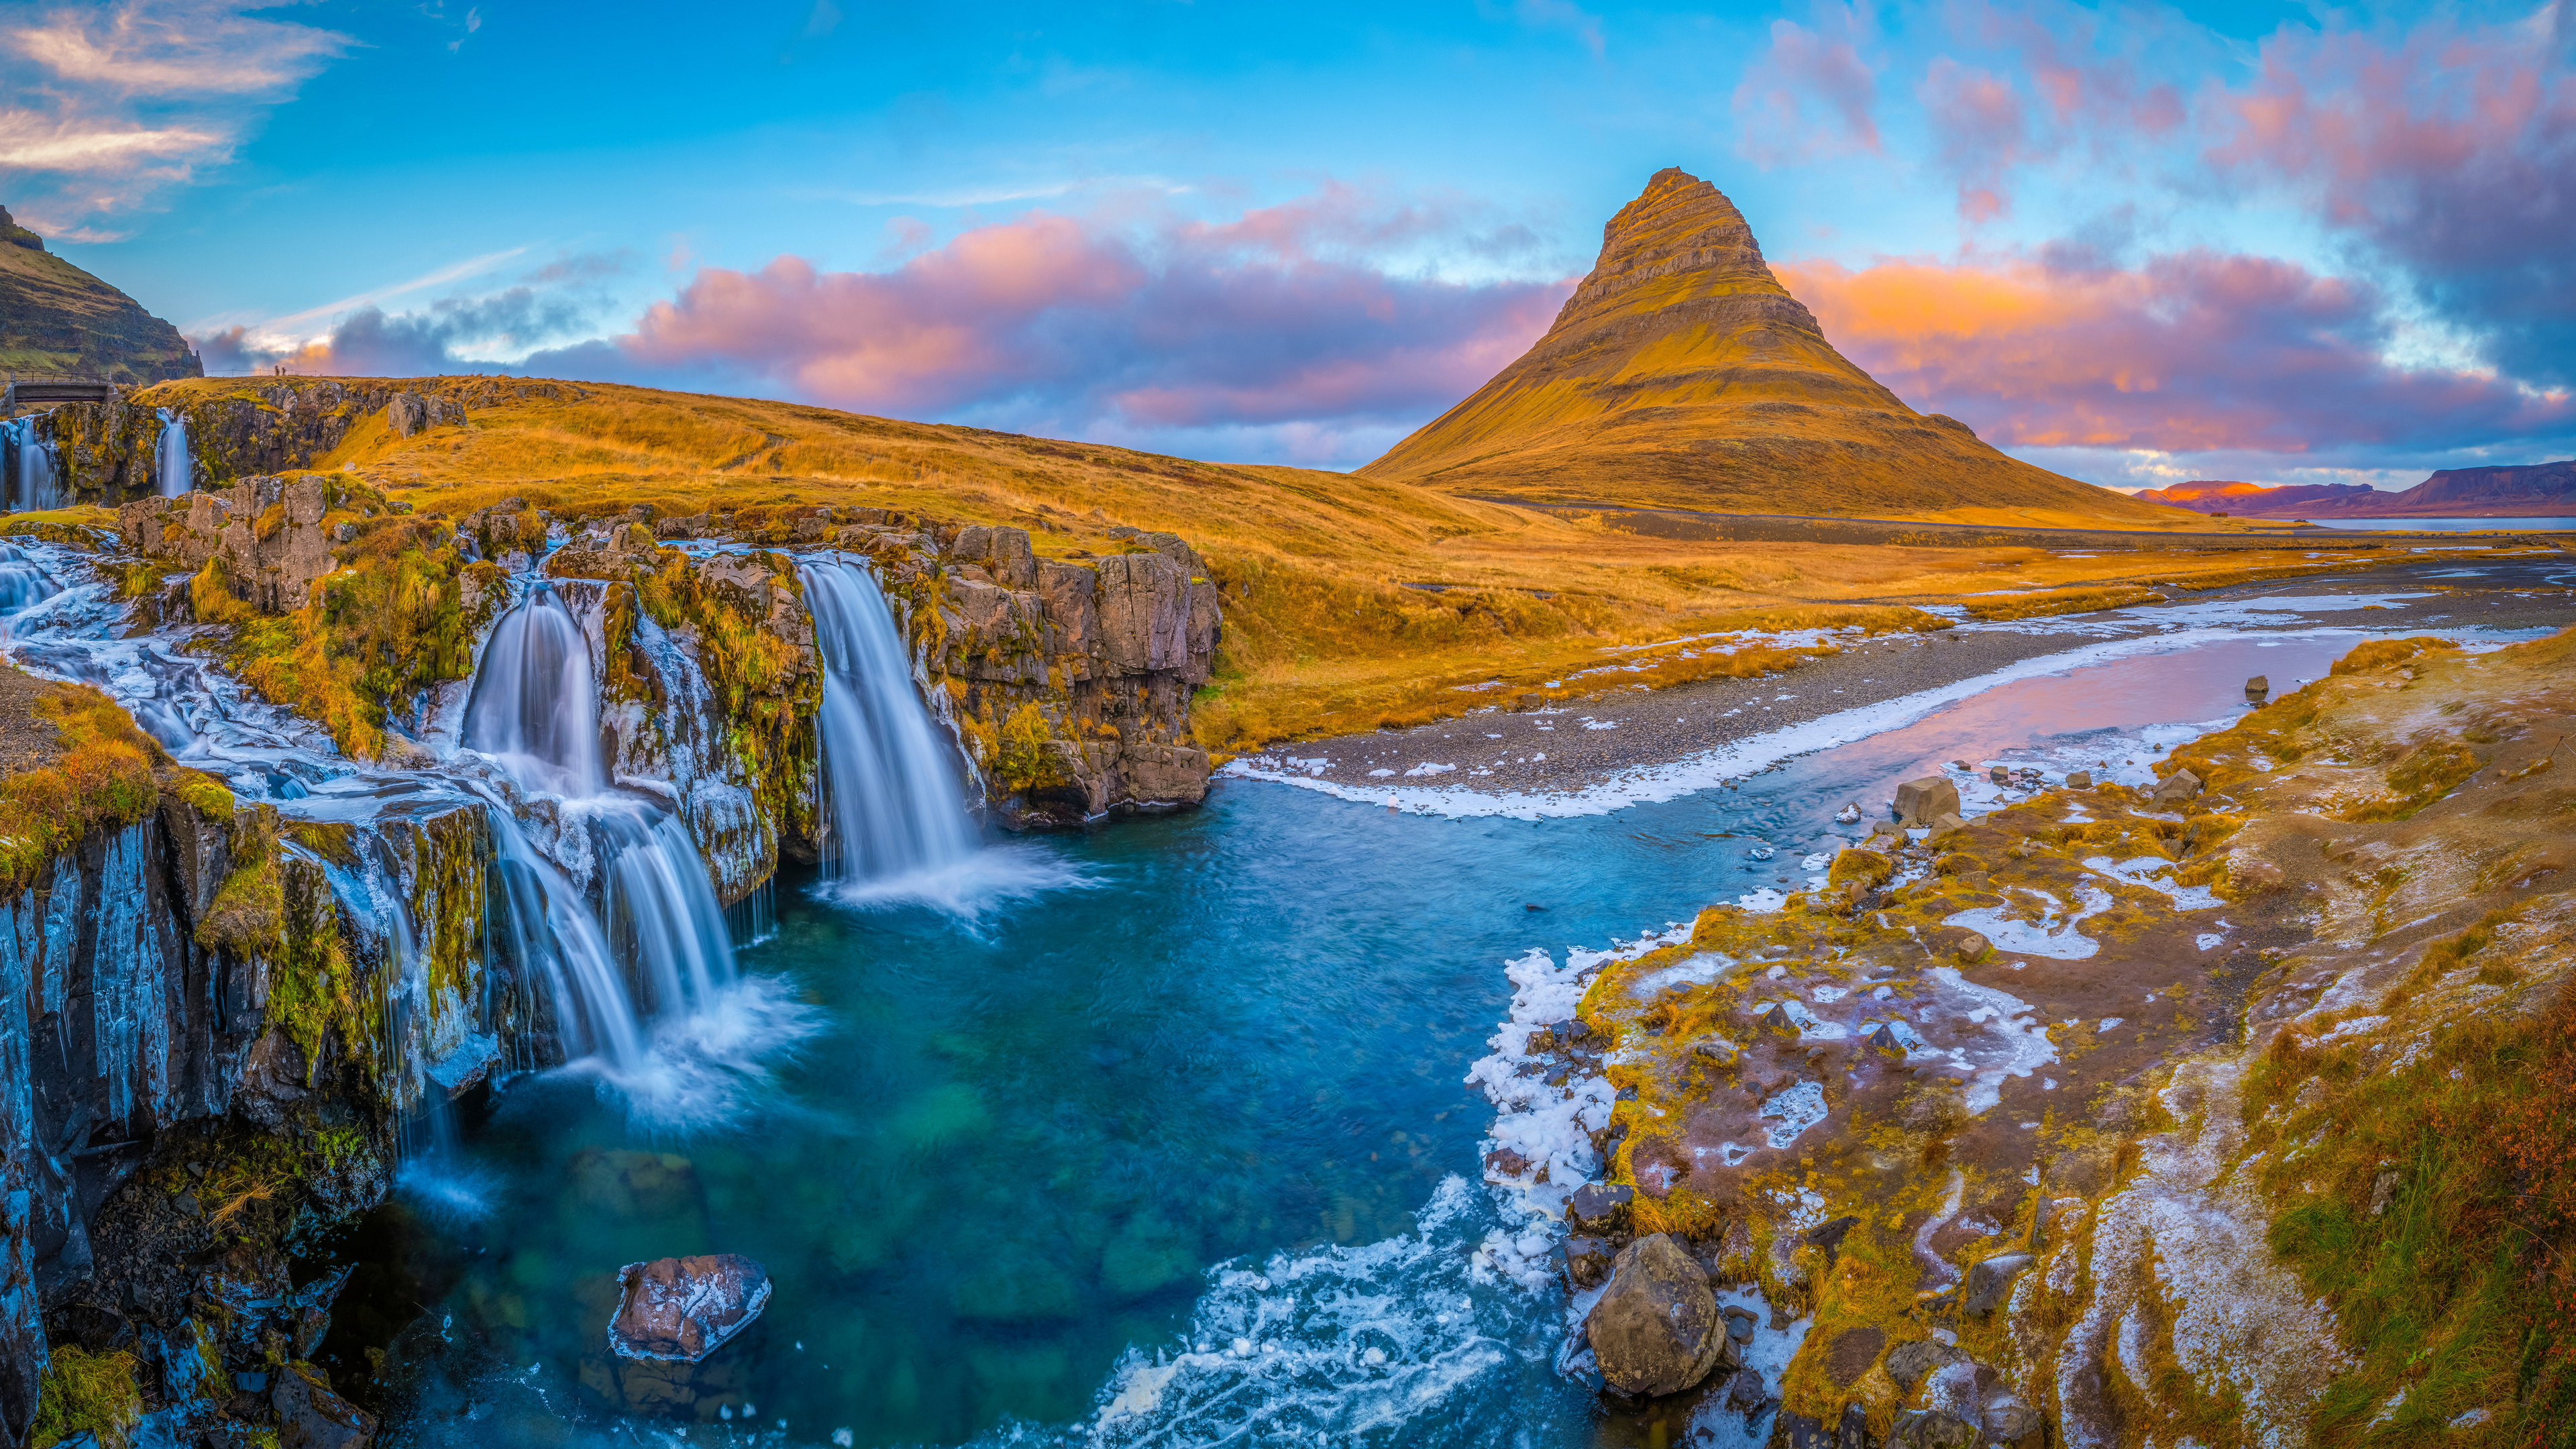 General 3840x2160 Iceland nature landscape waterfall river mountains water sunset sky clouds stones Kirkjufell